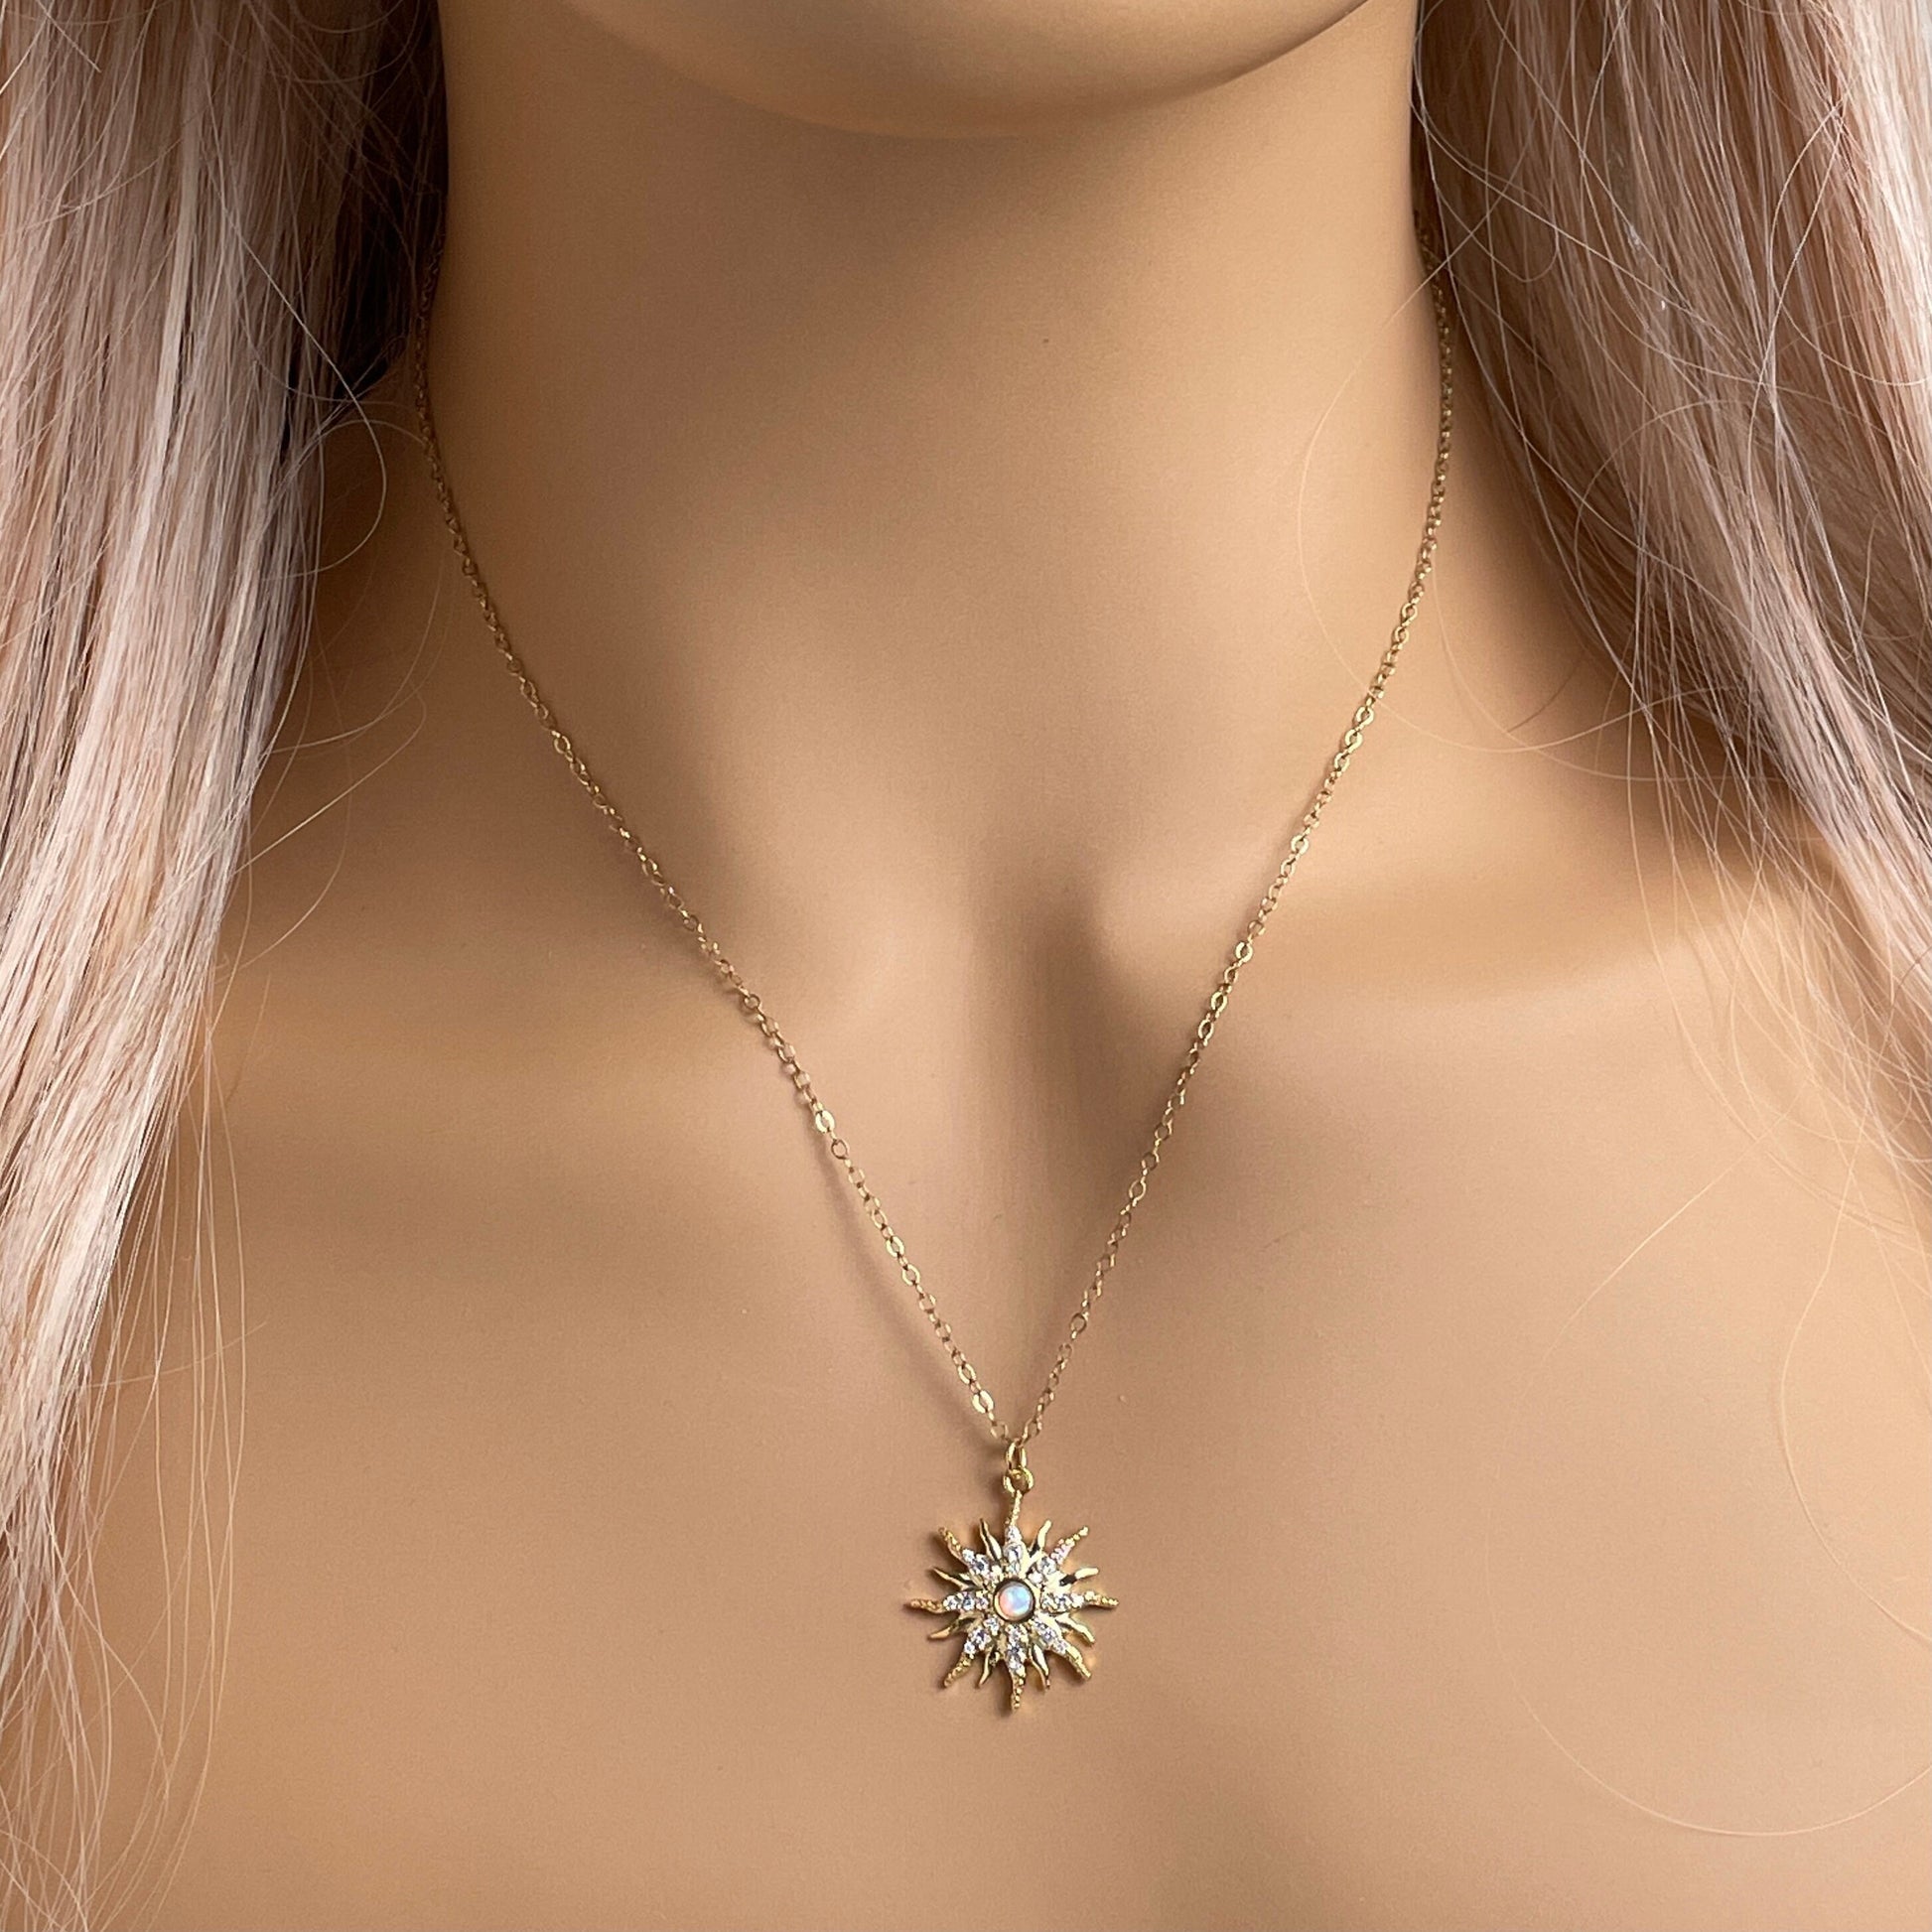 Opal Sun Necklace Gold, October Birthstone Charm, Zircon Sun Burst Pendant, Christmas Gifts For Her, M5-390